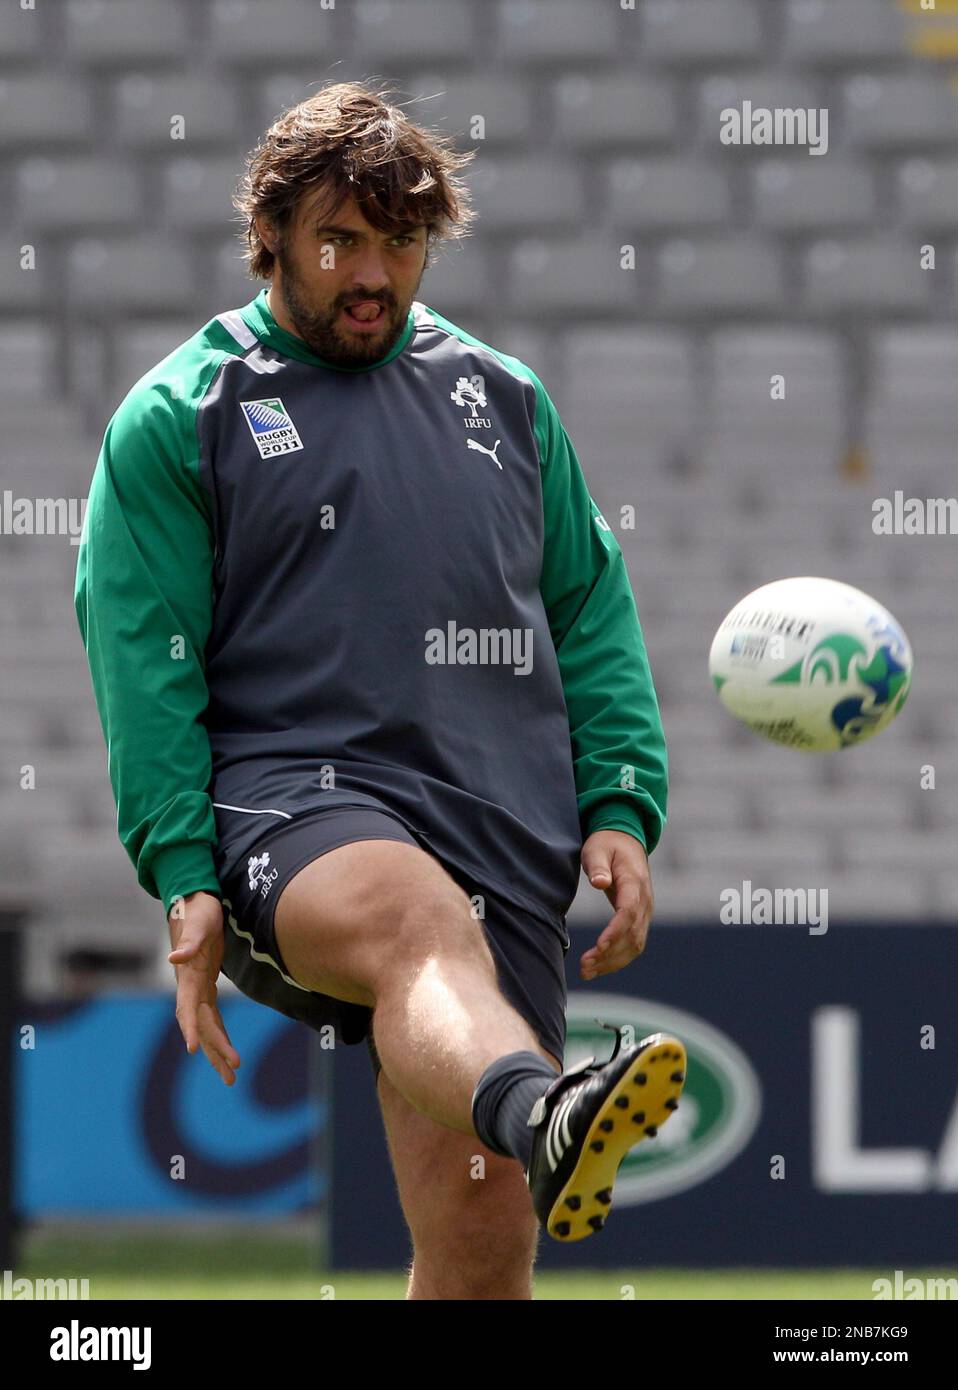 Ireland rugby player Tony Buckley kicks a ball during the captains run at Eden Park in Auckland, New Zealand, Friday, Sept